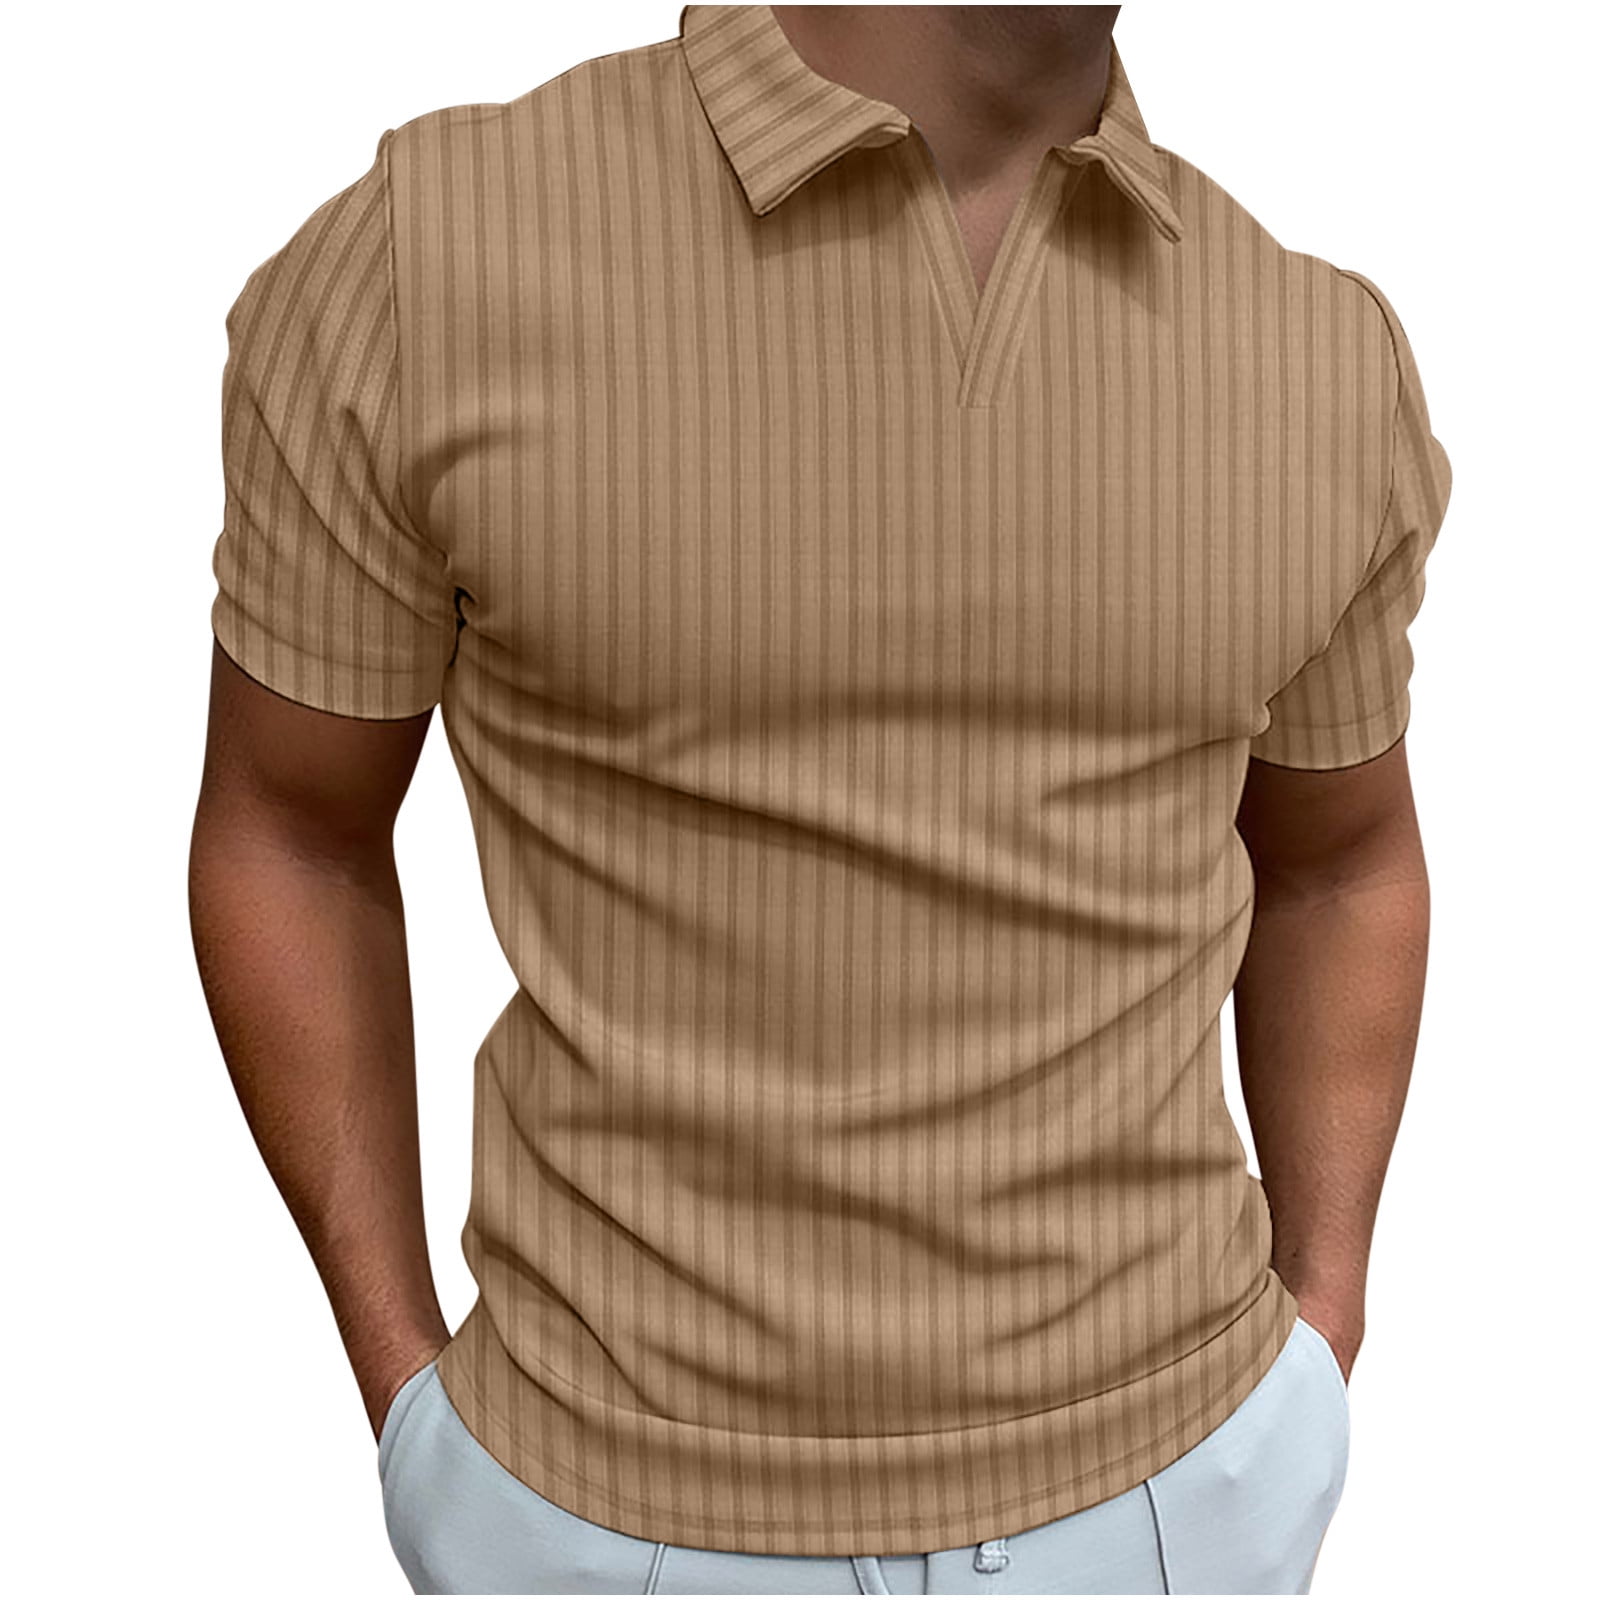 ZCFZJW Men's Zipper Polo Shirts Waffle Knit Polo T Shirts Summer Short  Sleeve Casual Slim Fit Knitted Golf Shirt Solid Color Basic Tee Shirt Khaki  S